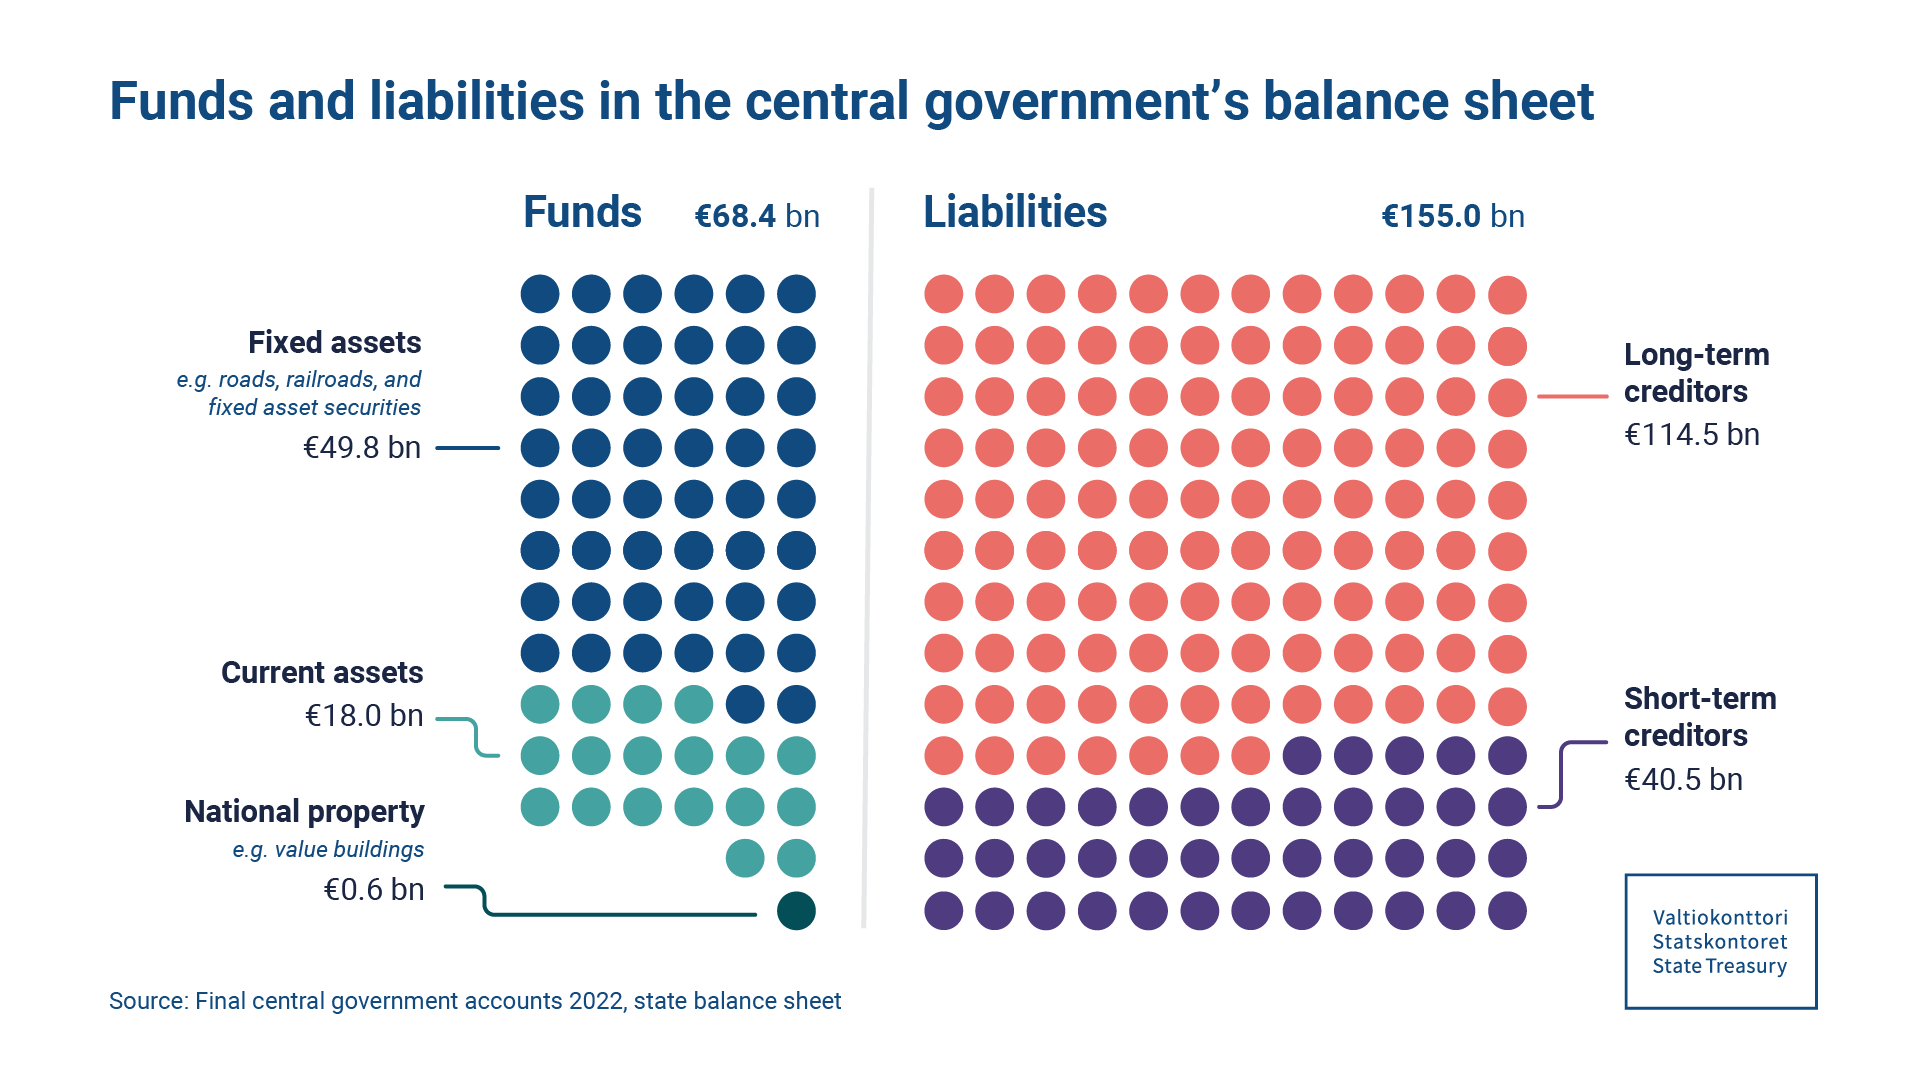 Funds and liabilities in the central government's balance sheet